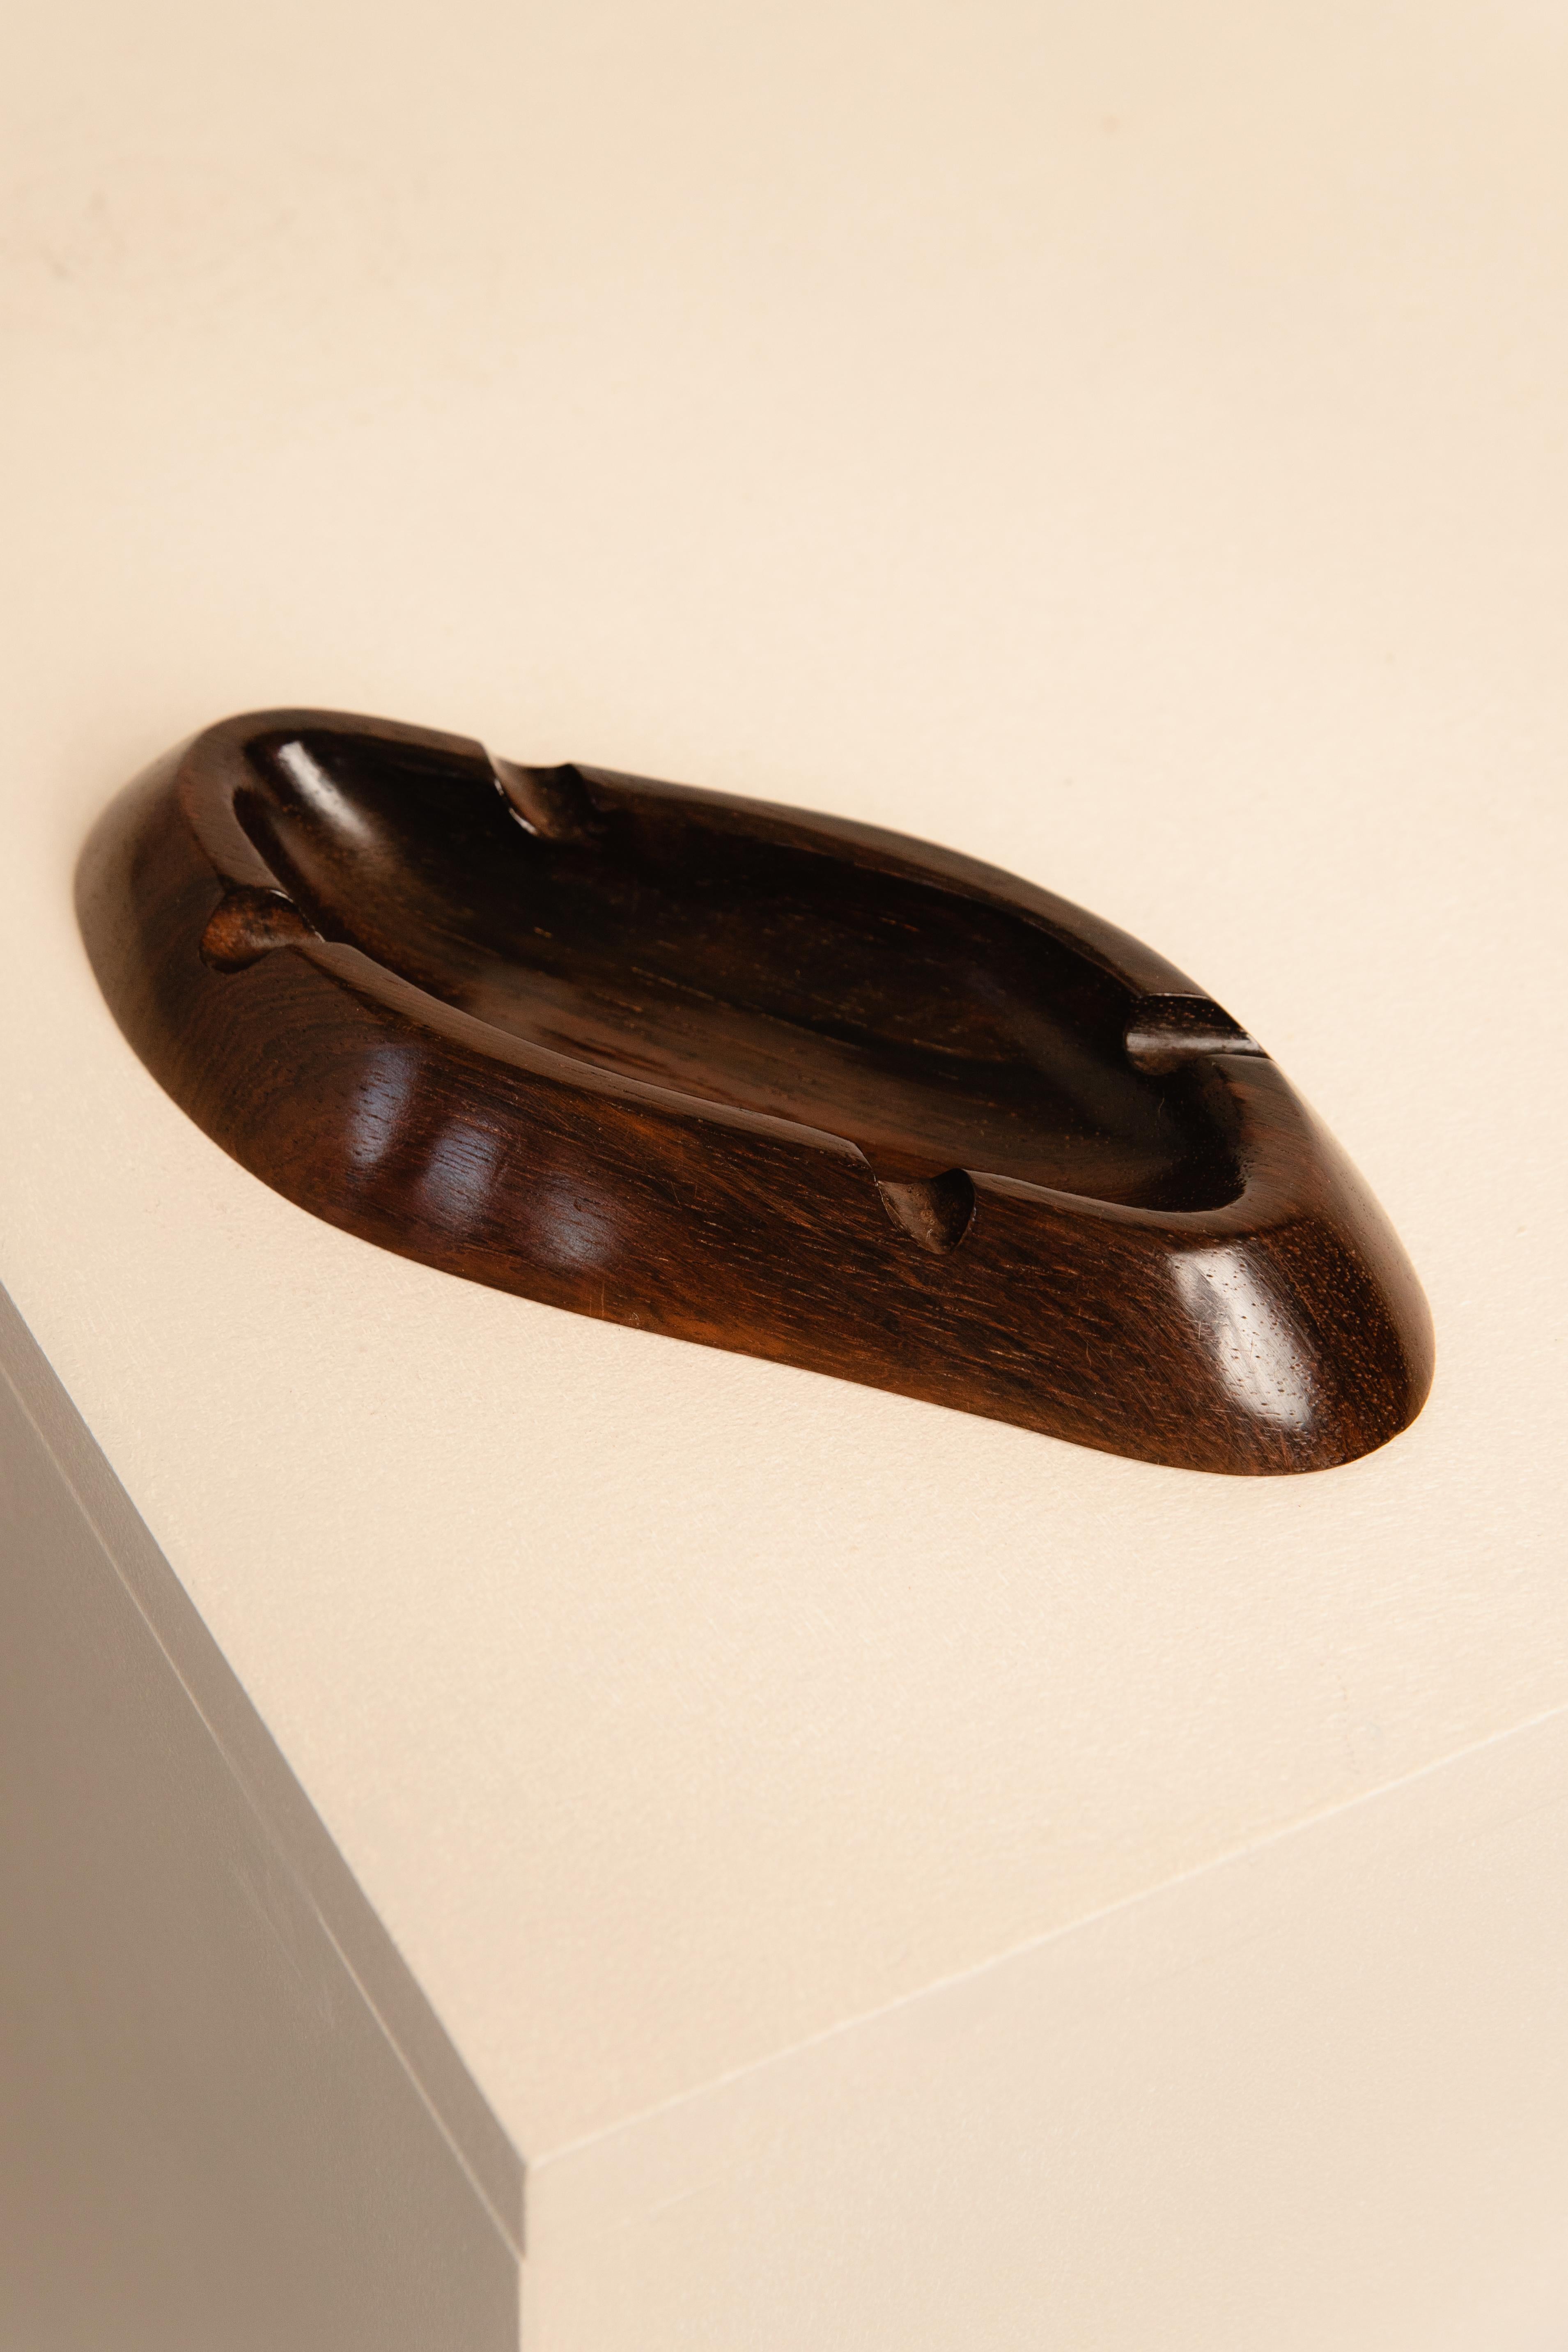 20th Century Brazilian Midcentury Ashtray in Solid Rosewood by Jac-Art, 1970s For Sale